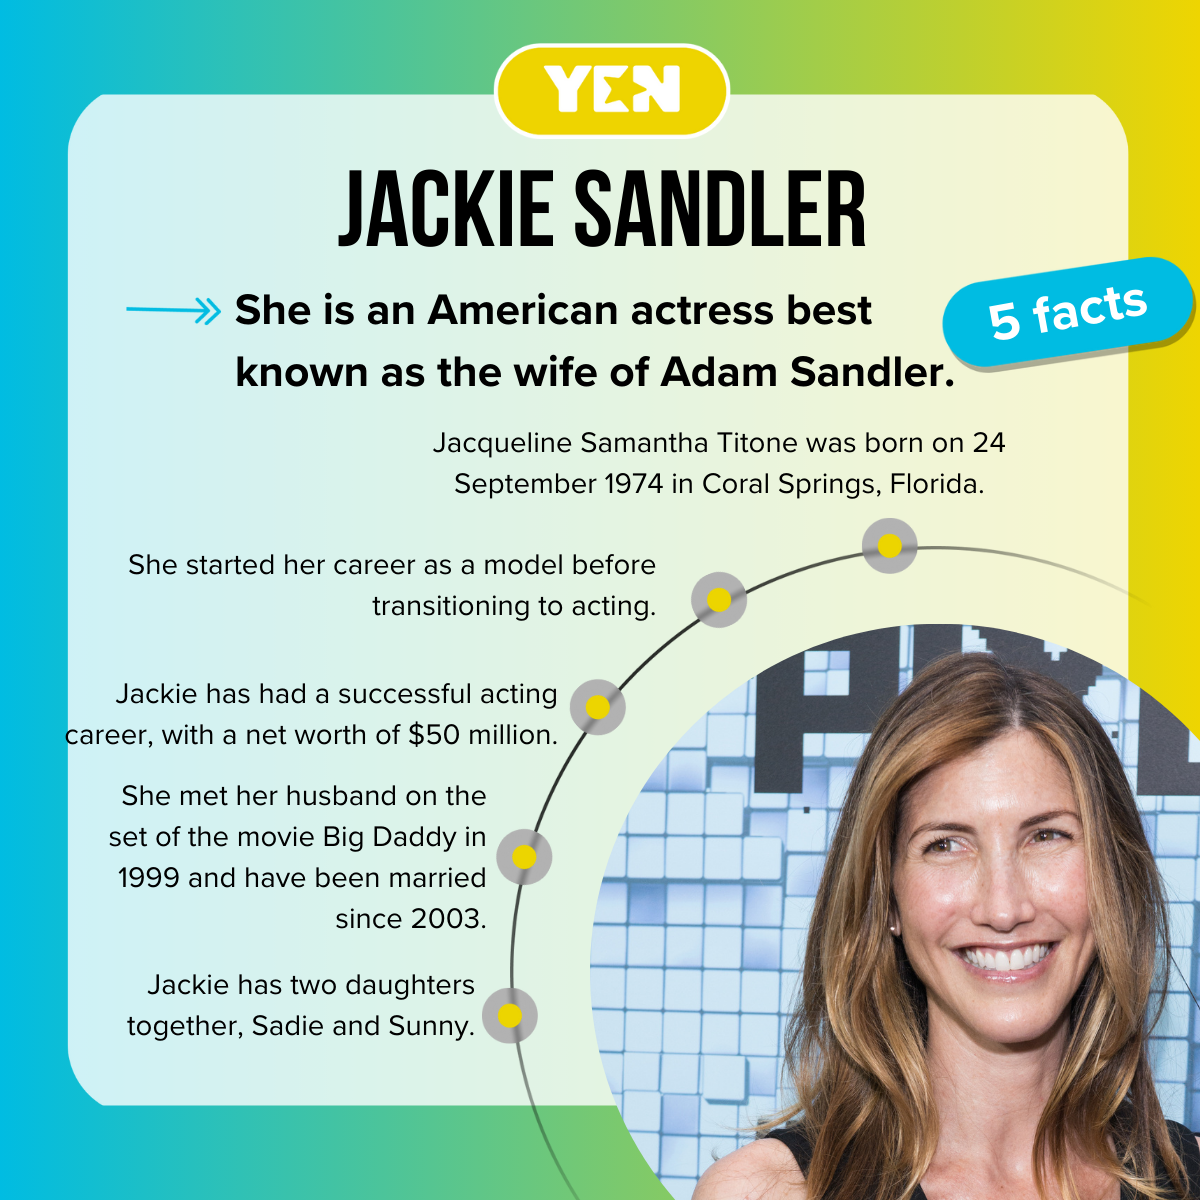 5 facts about Jackie Sandler